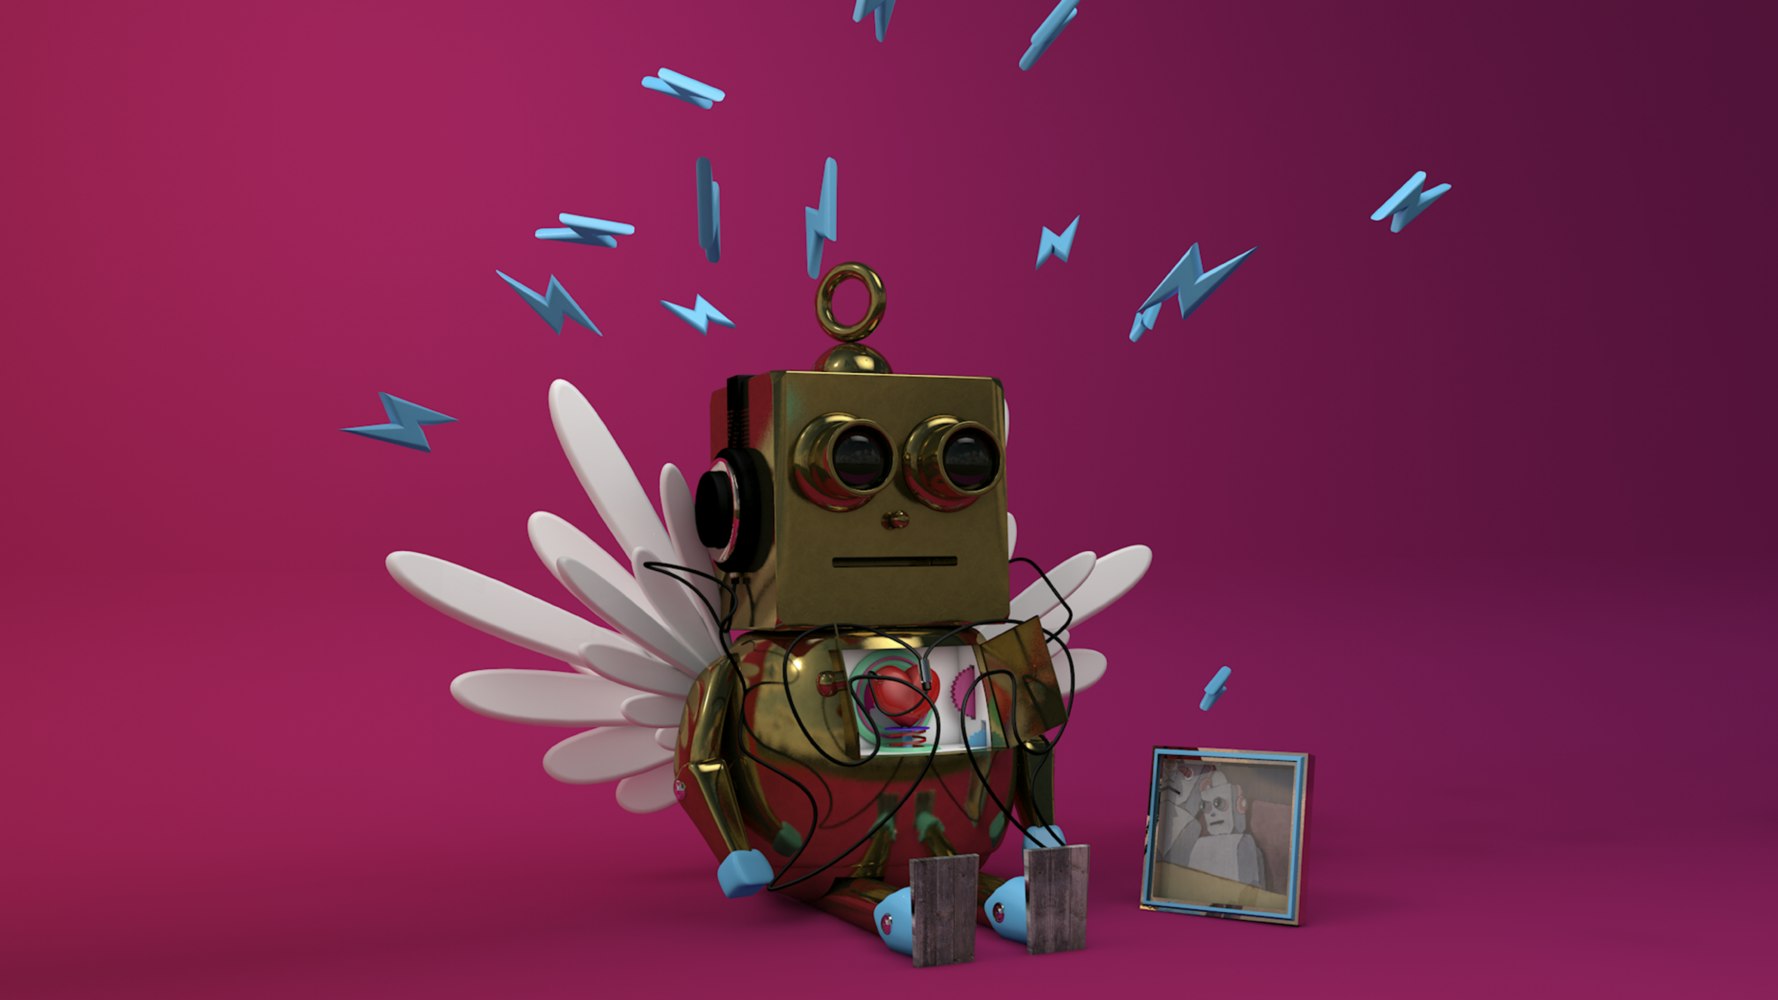 Small robot with wings